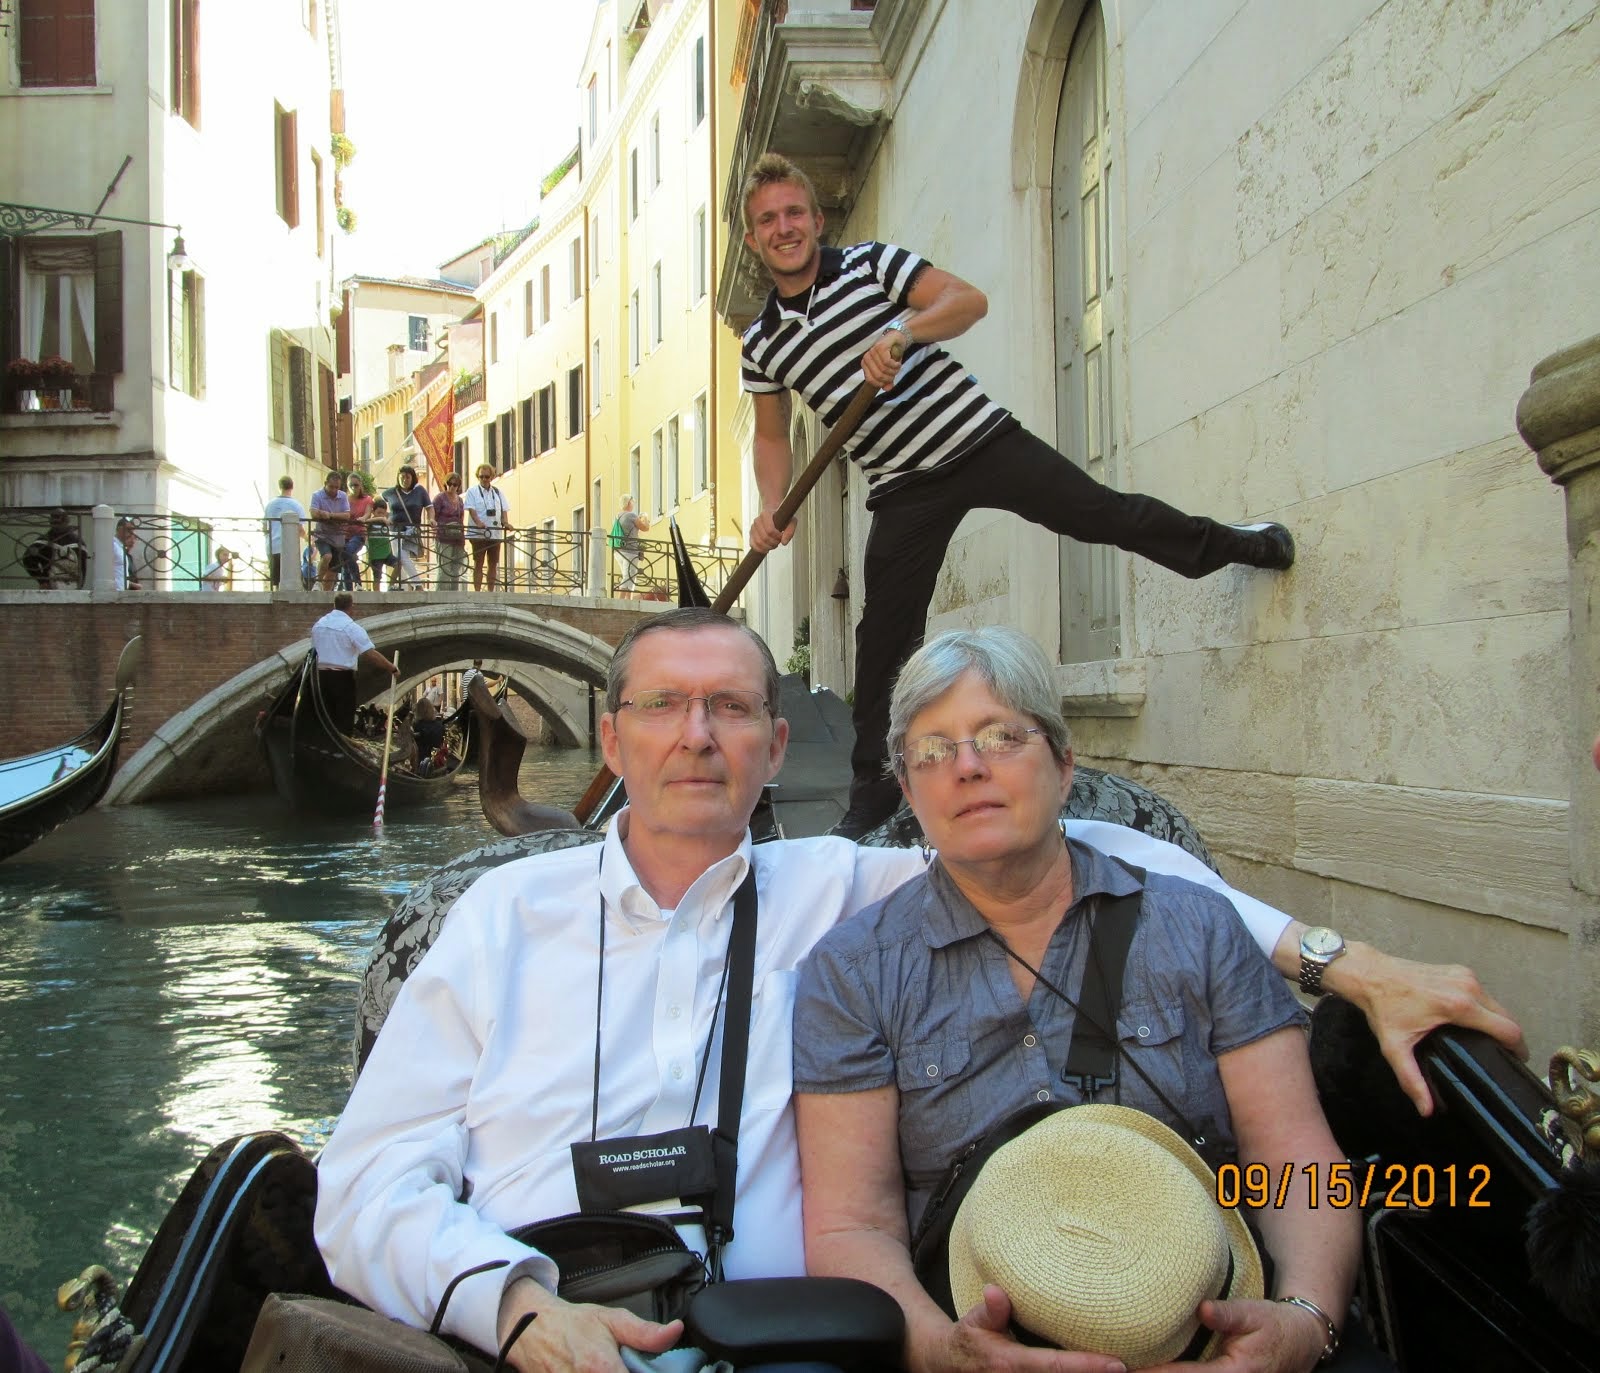 Honest - we loved Venice, but the glare off the water...